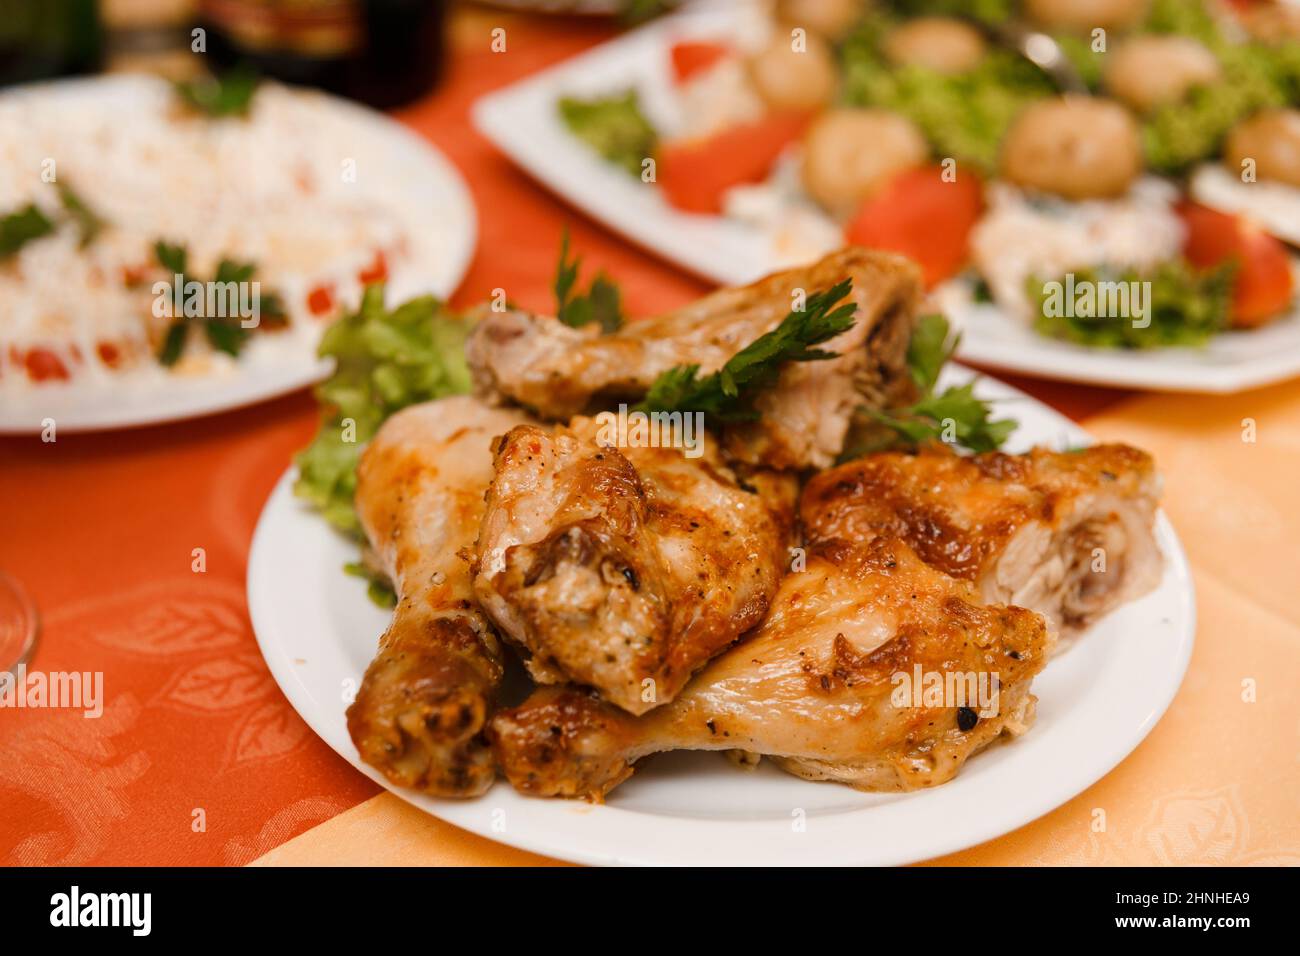 Plate with roasted chicken on holiday table Stock Photo